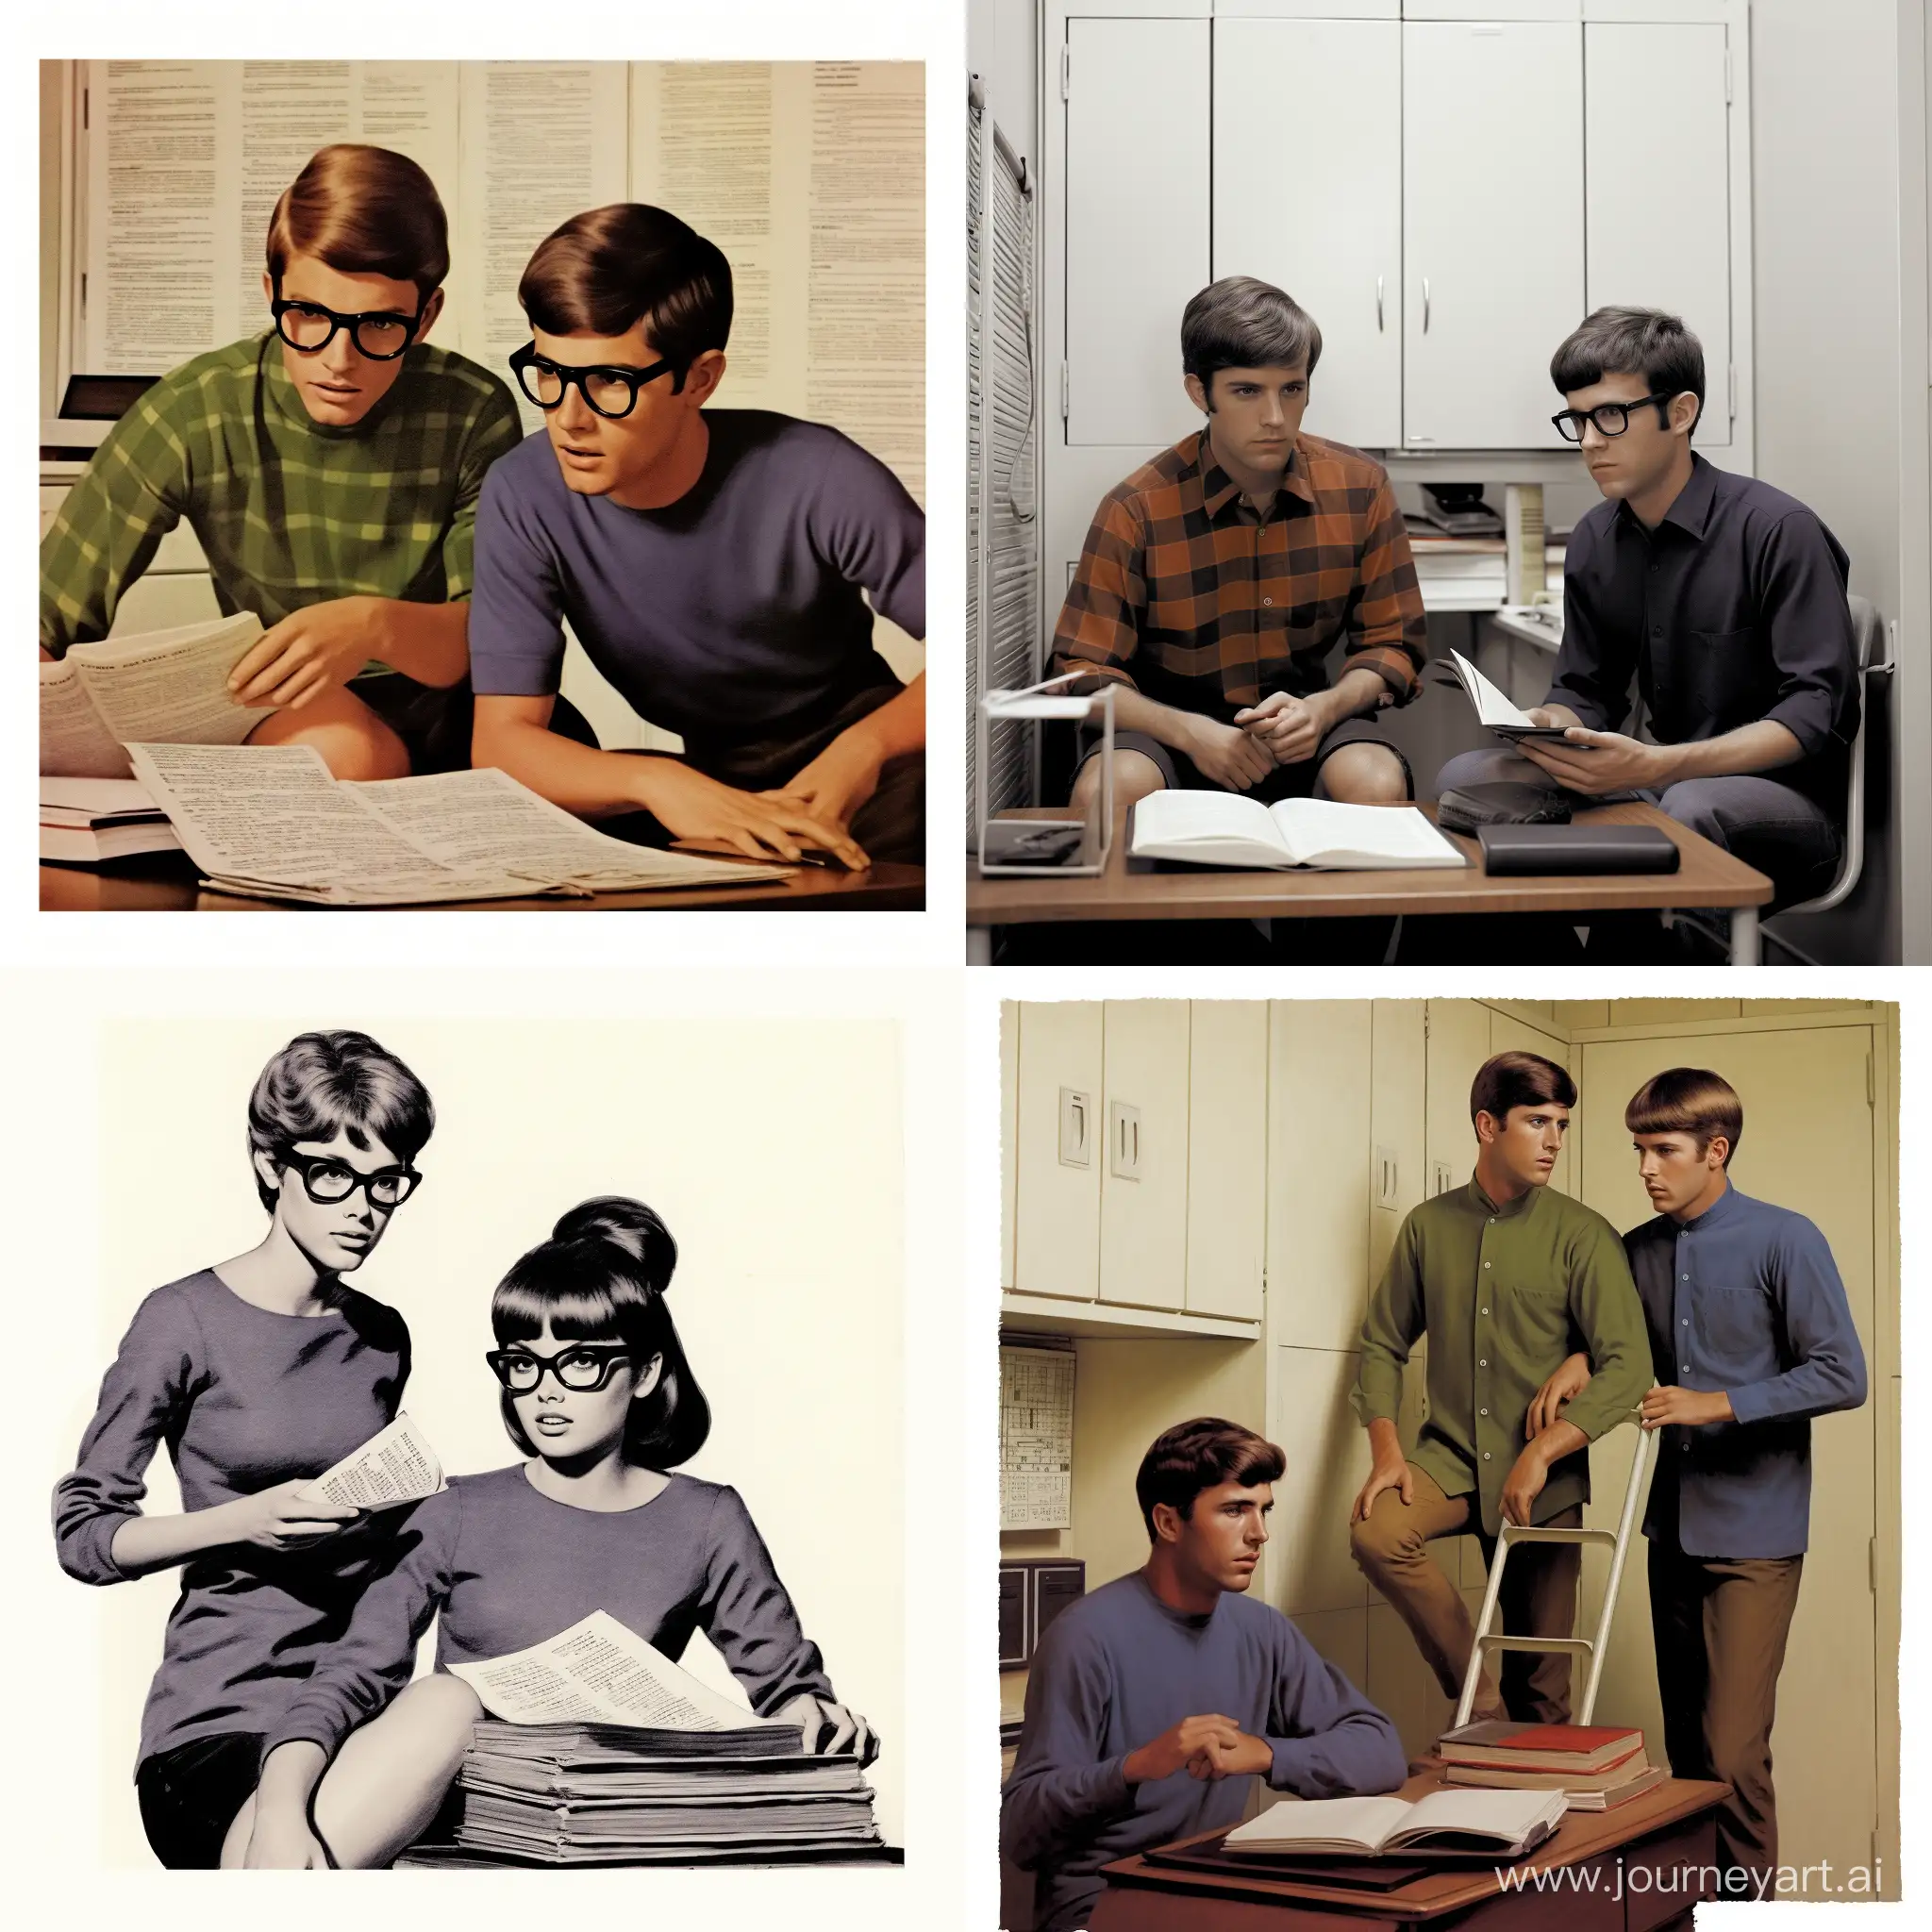 Two male college students studying in their dorm room in the 1960s?